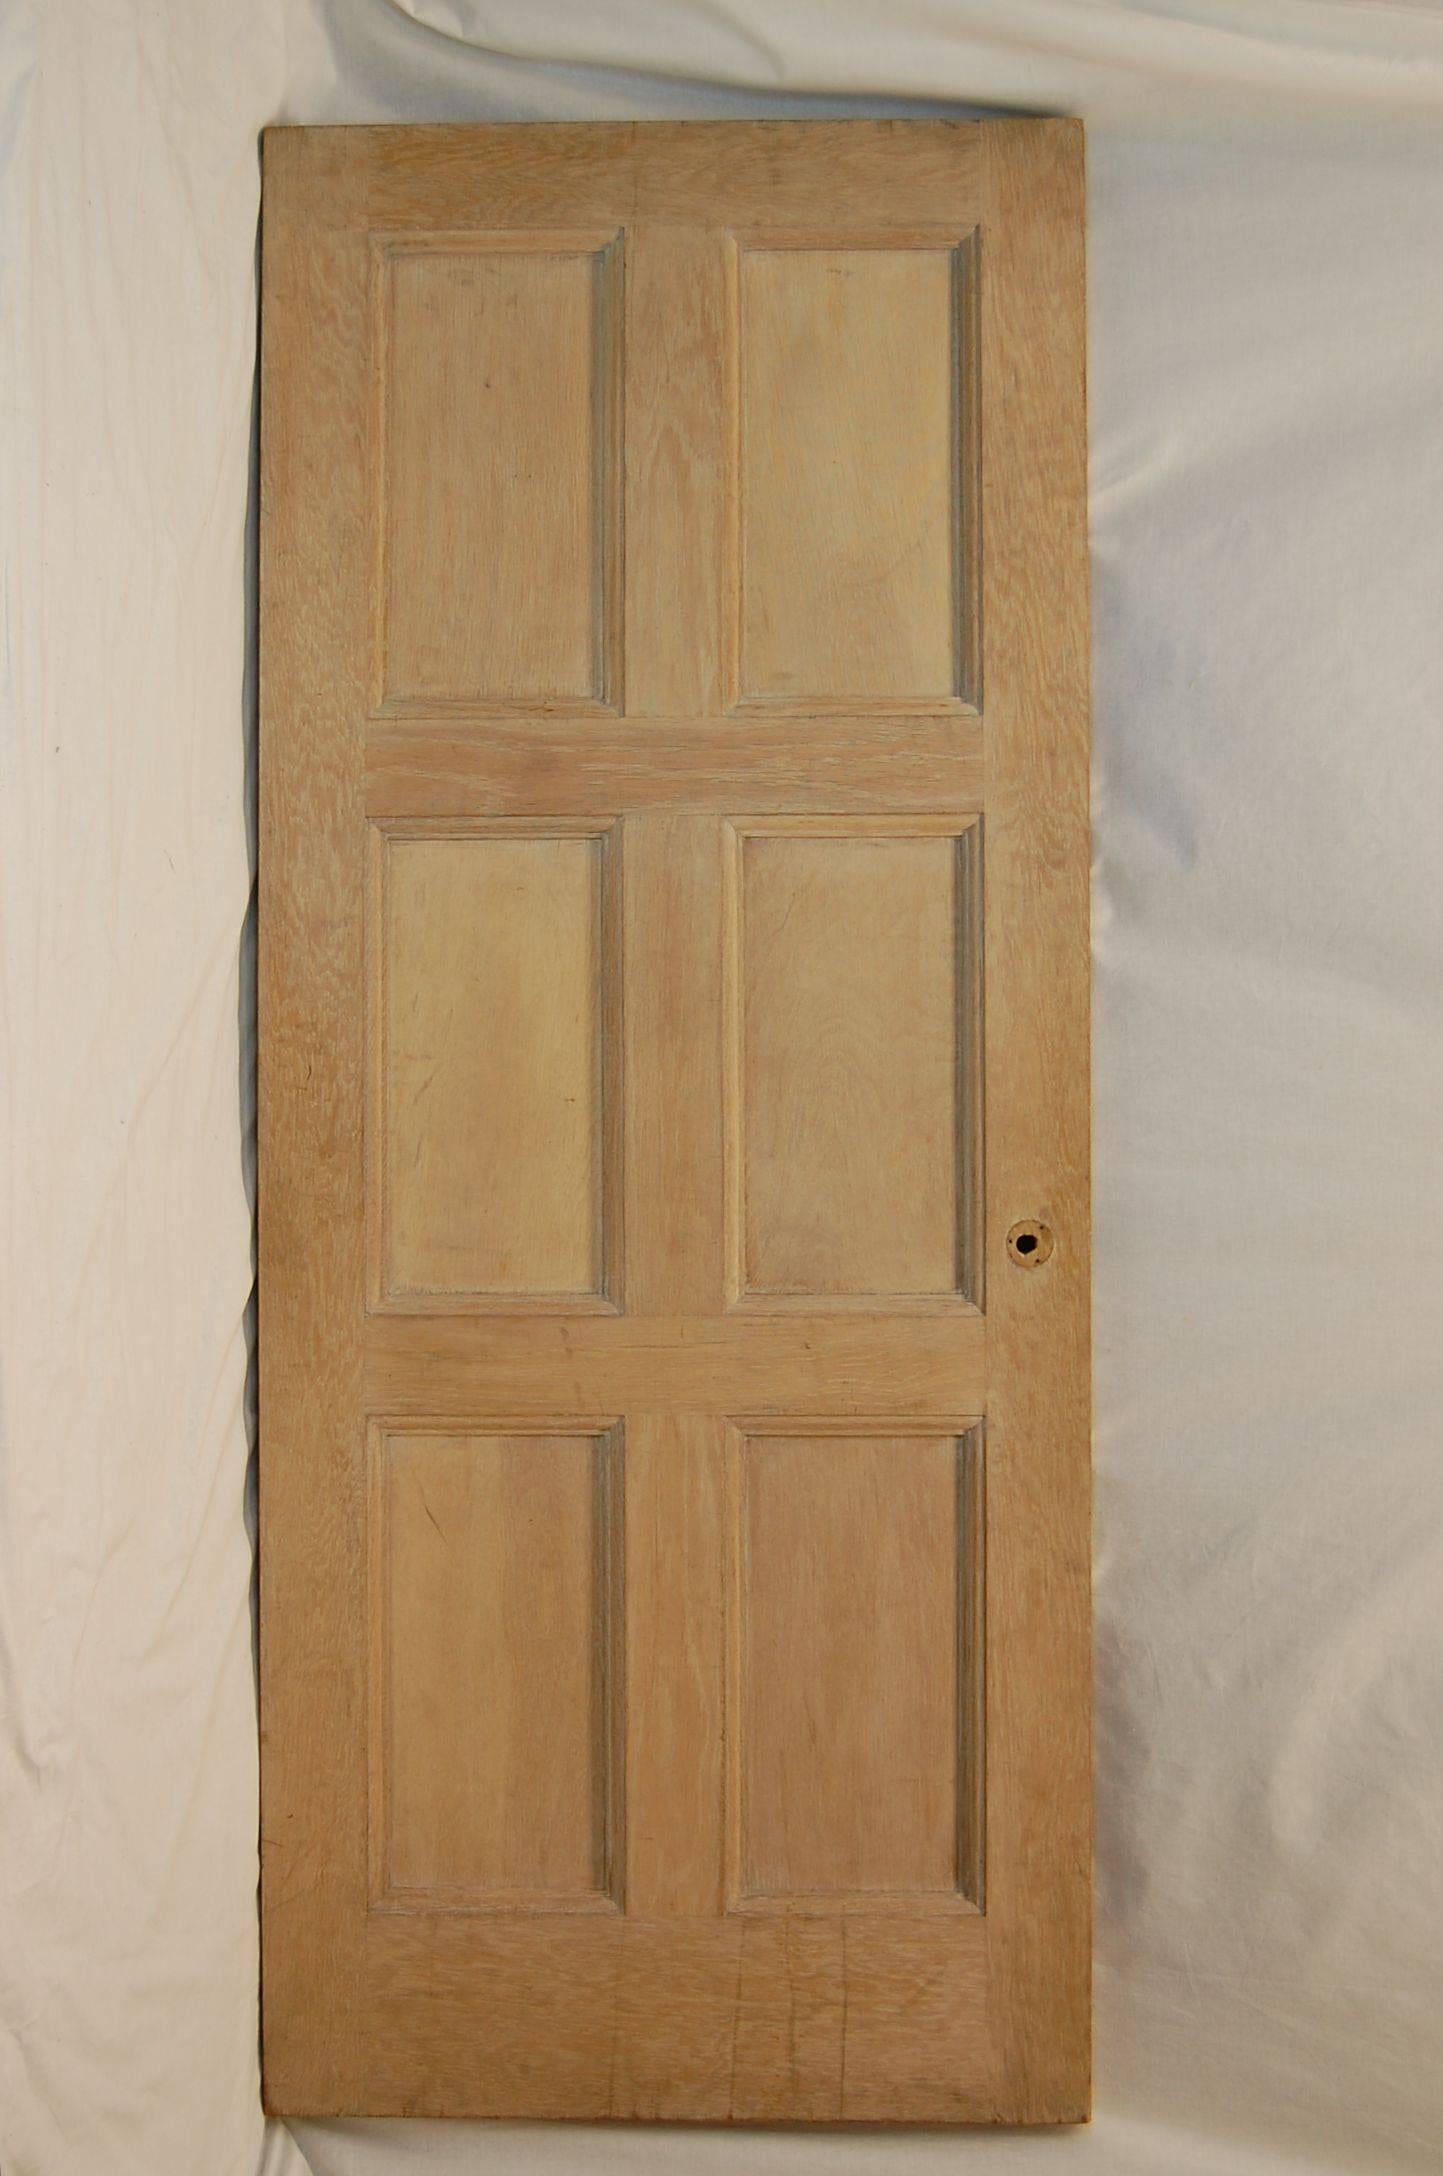 This oak door has been stripped and is ready to be finished and installed. It is mortised for three- 4 inch hinges. Condition is excellent. Removed from a mansion in Pittsburgh's Murdoch Farms region.